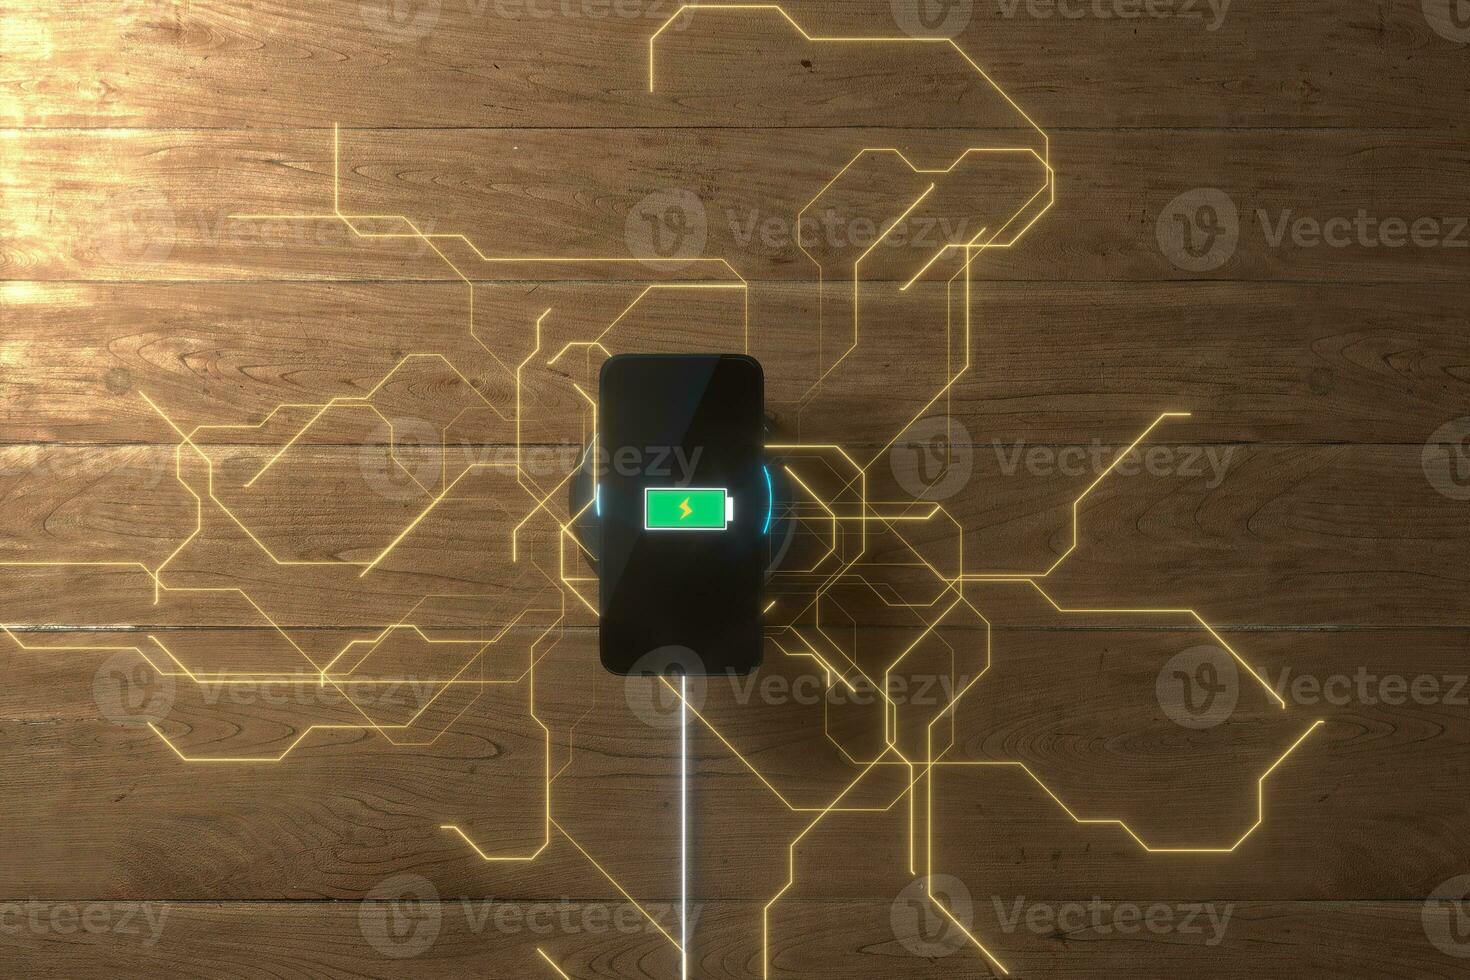 The charging mobile phone with wireless charger, 3d rendering. photo